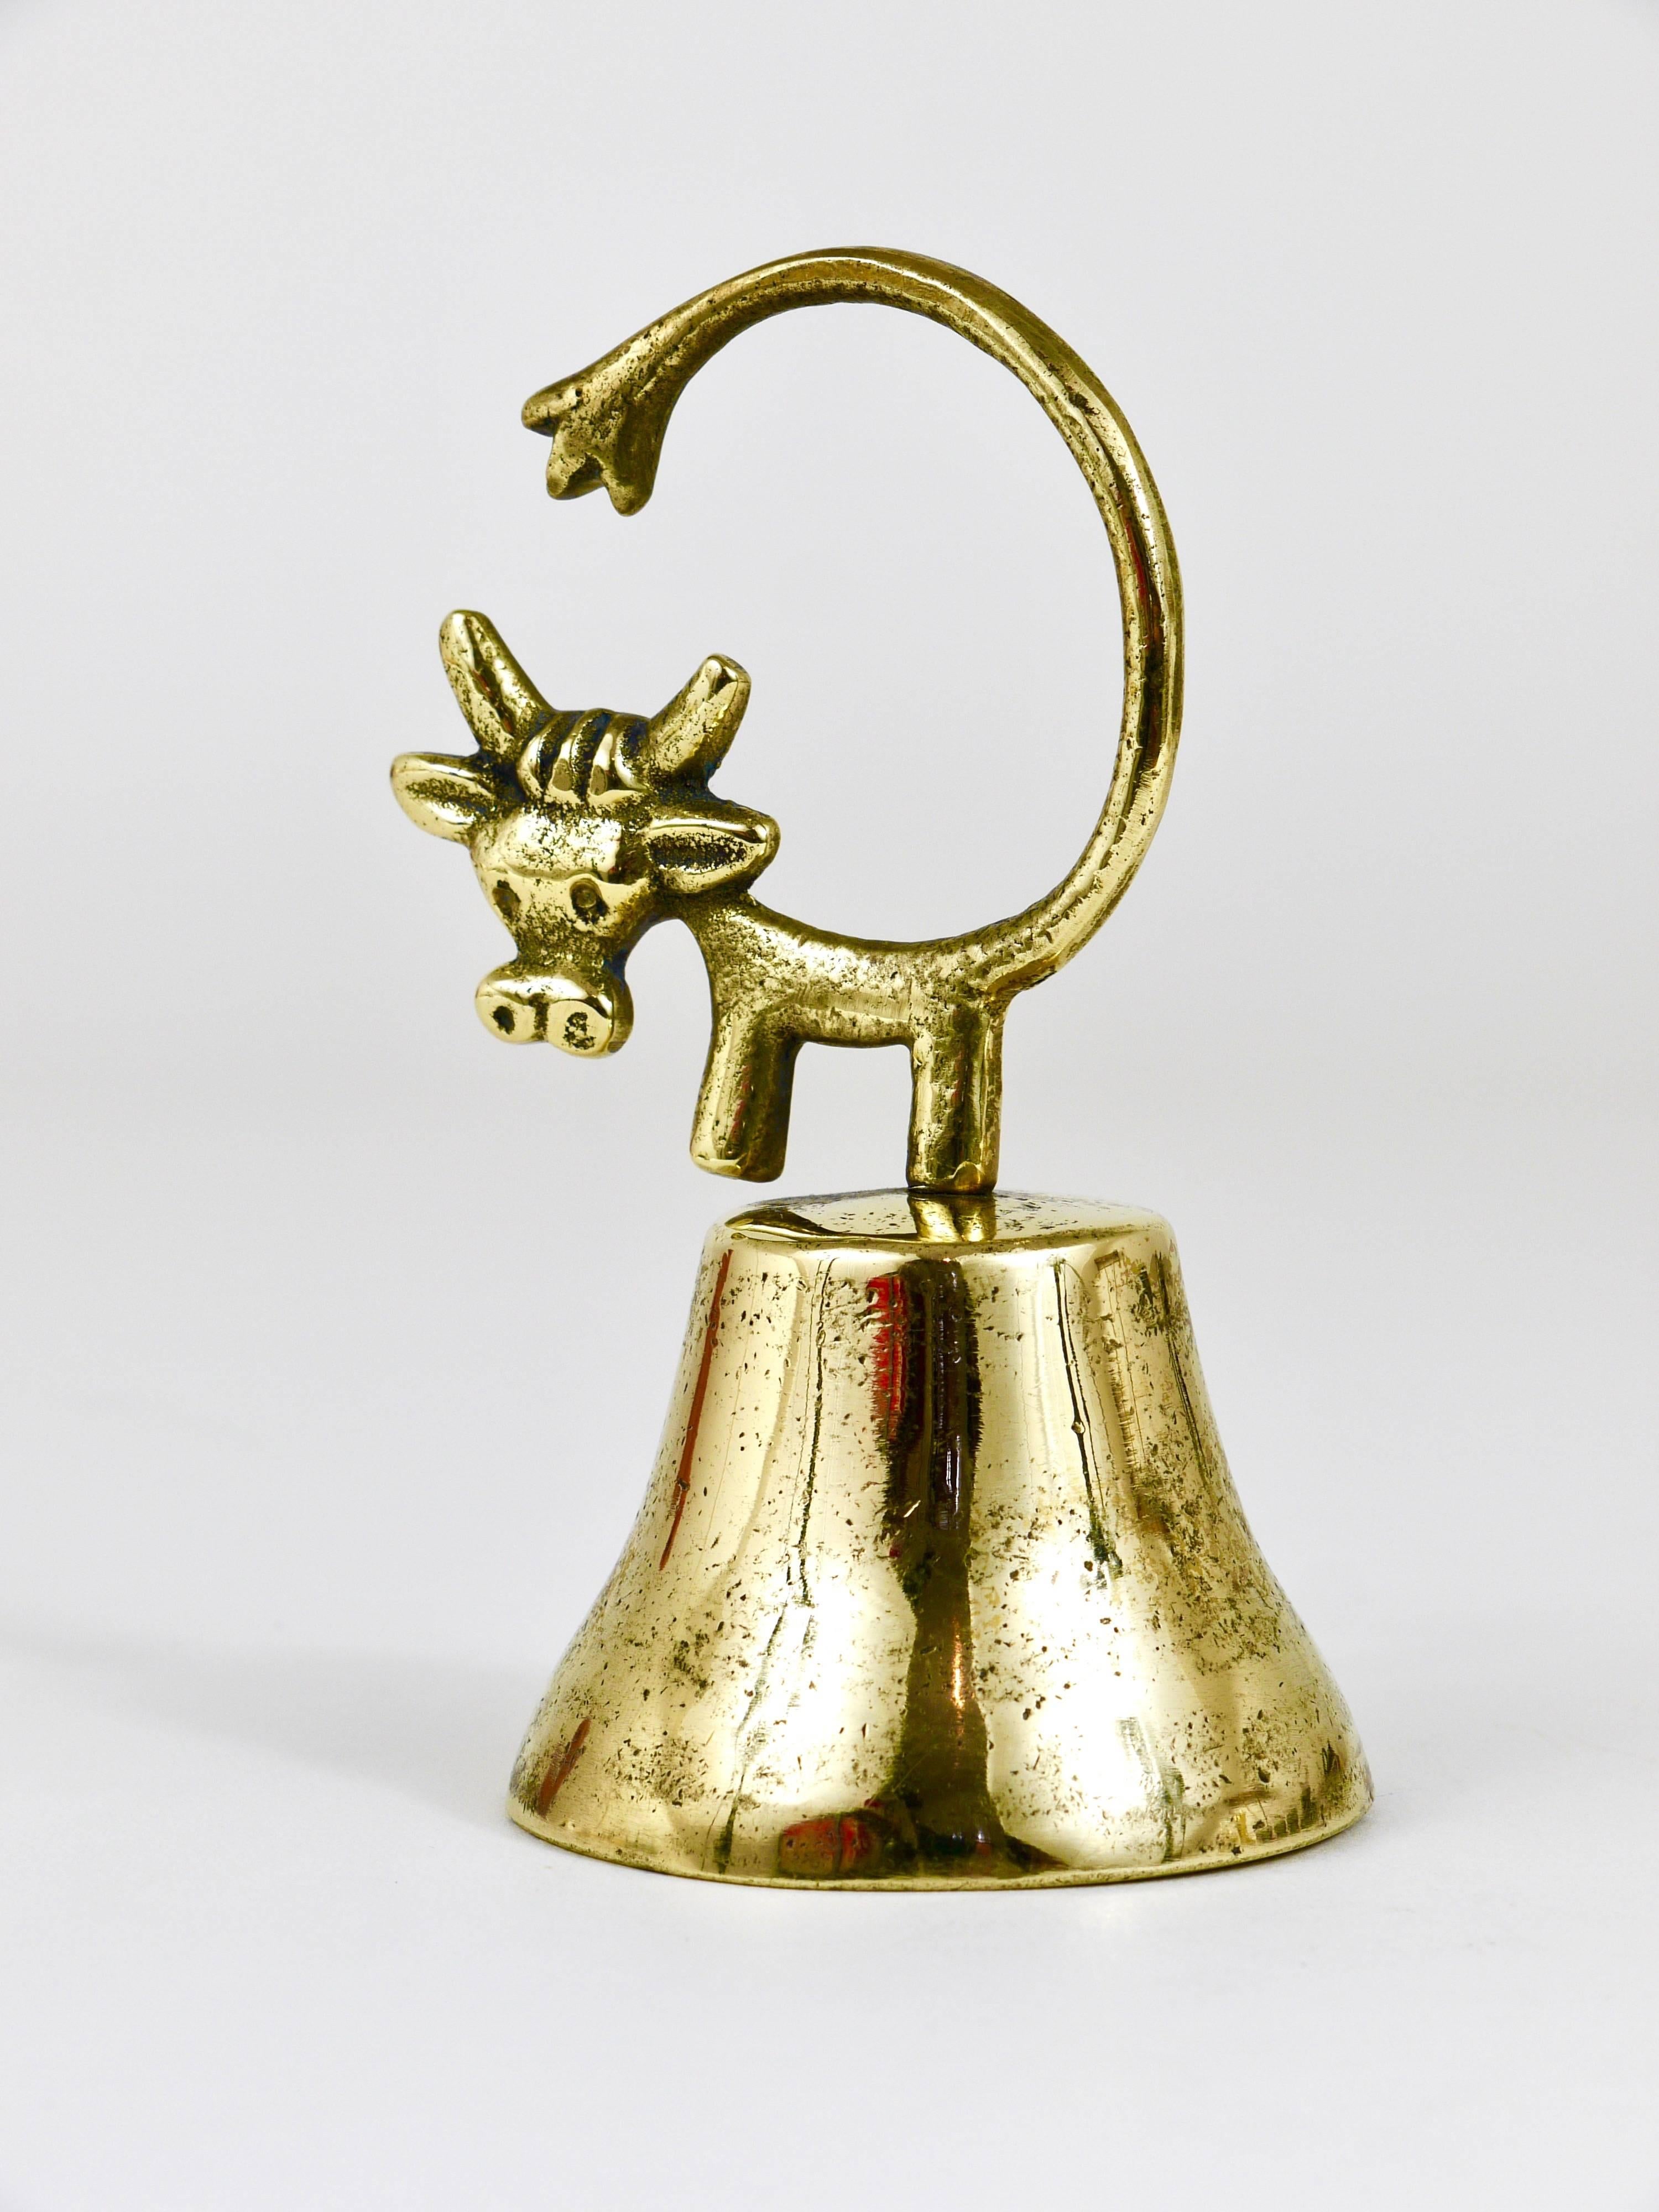 A charming Austrian table bell, displaying a cow. A very humorous design by Walter Bosse, executed by Hertha Baller Austria in the 1950s. Made of brass, in good condition with nice patina.